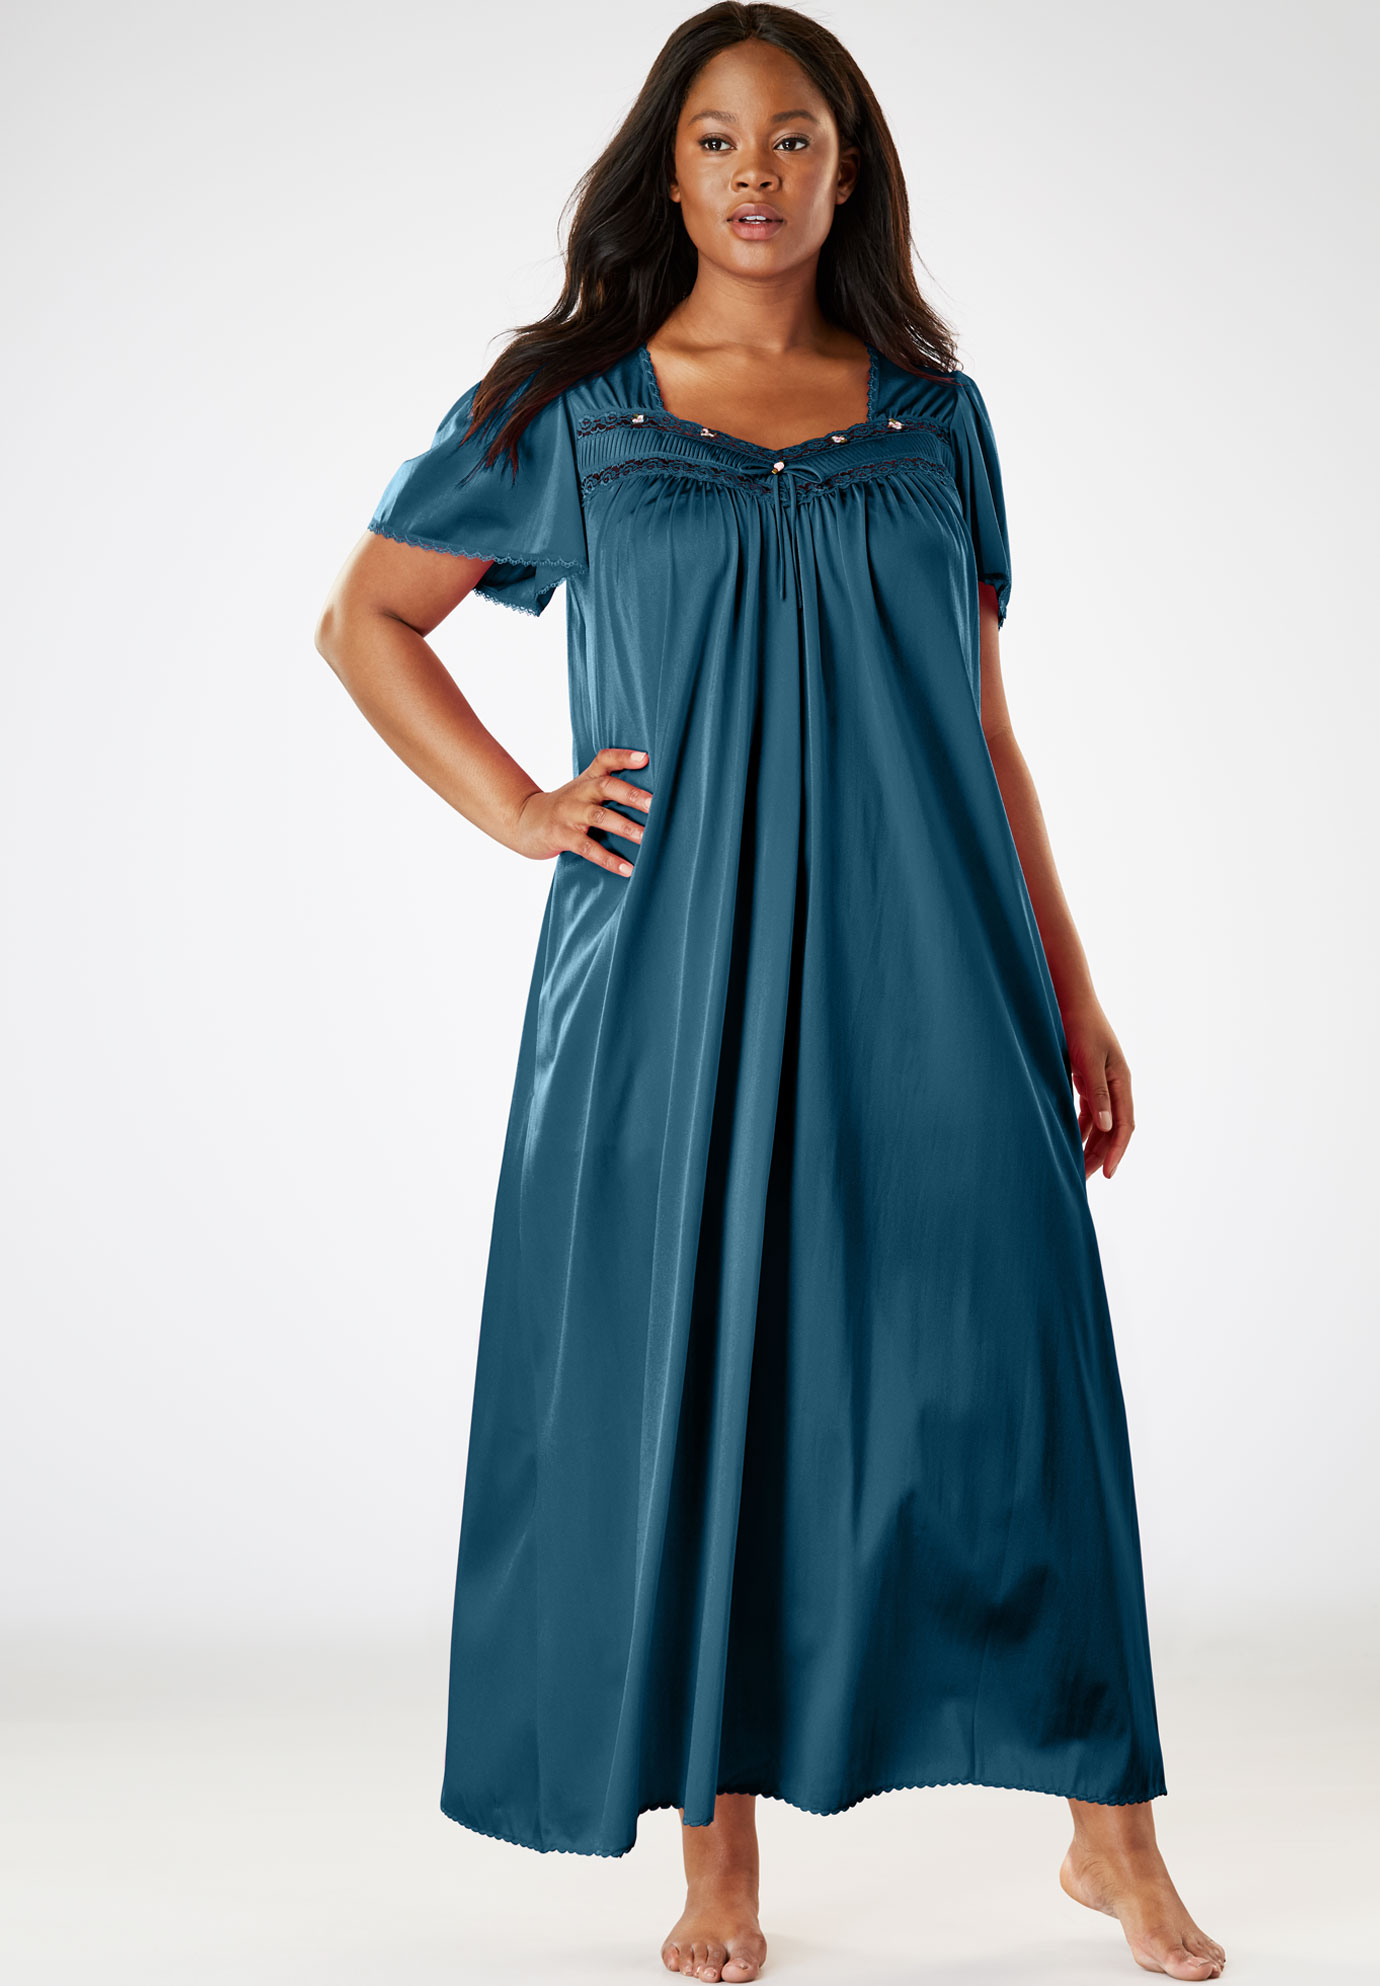 Long Silky Lace Trim Gown By Only Necessities® Plus Size Sleep